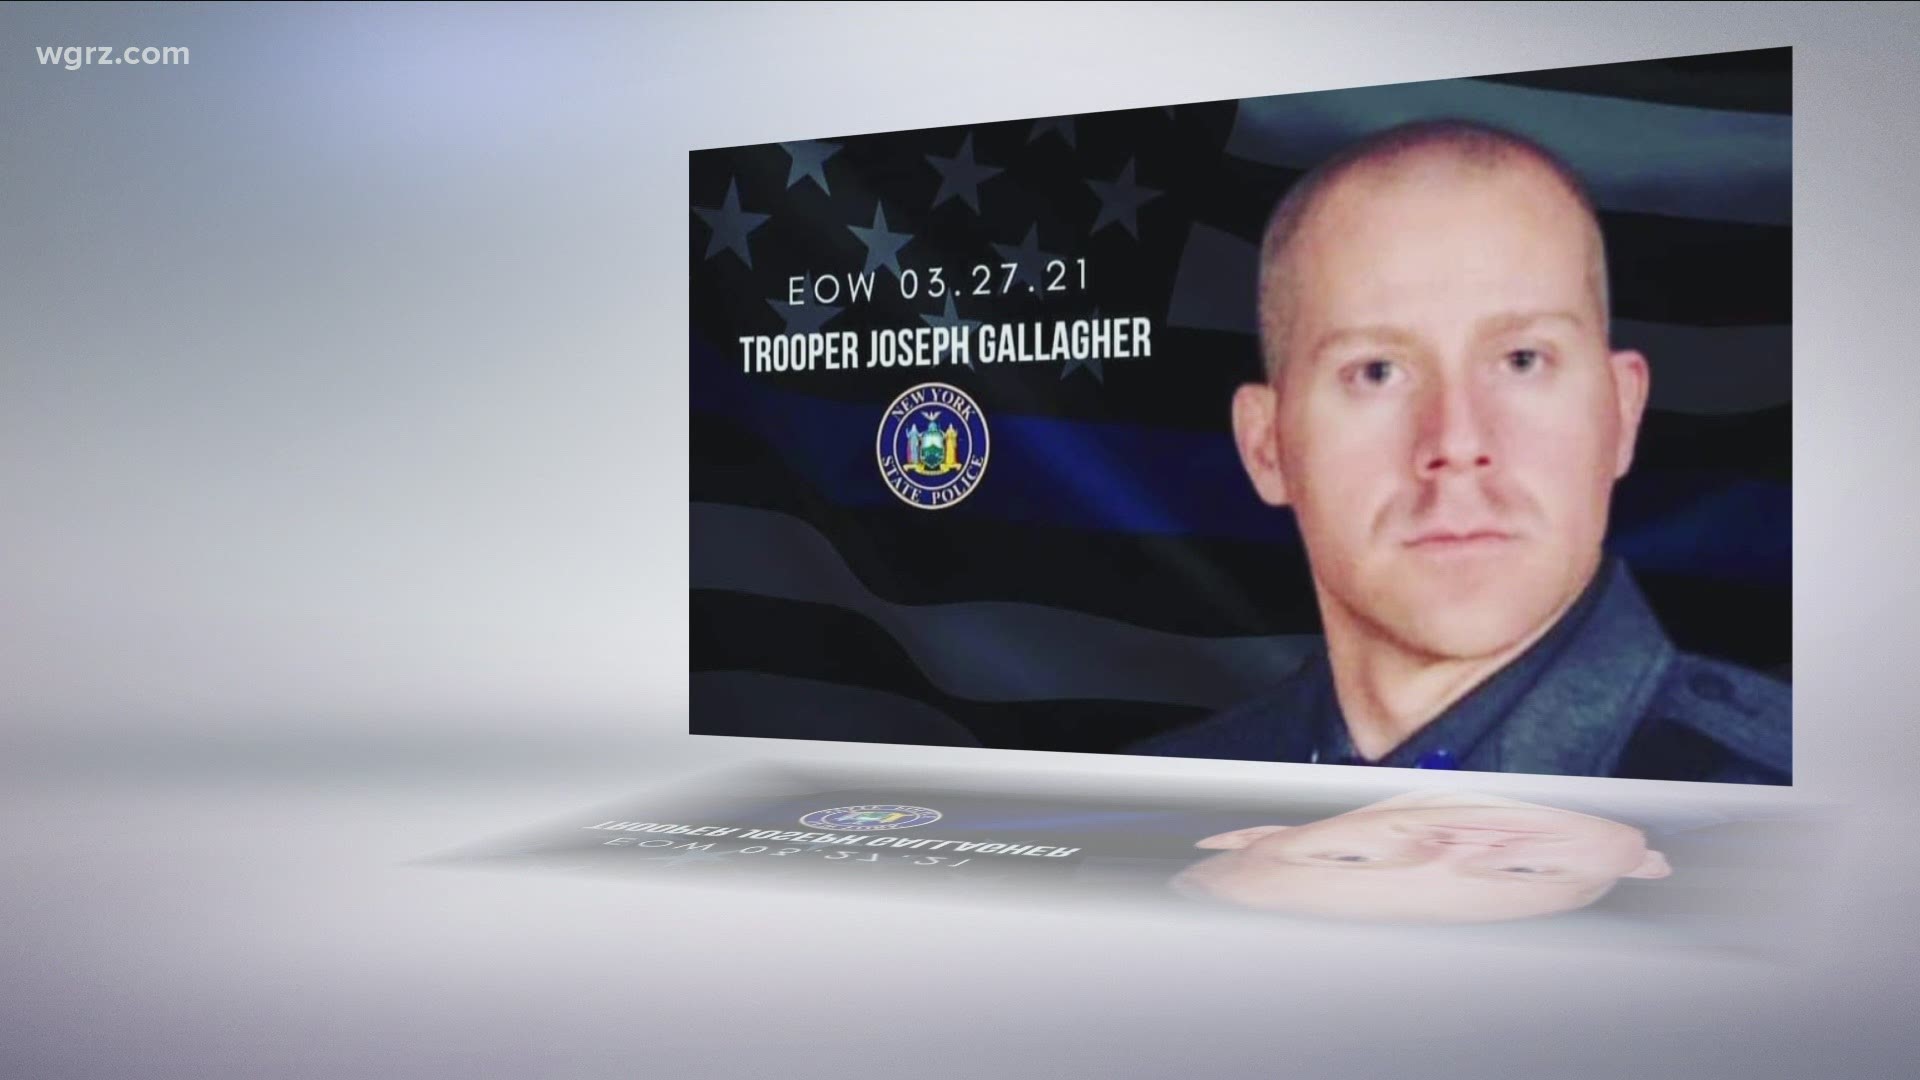 Trooper Joseph Gallagher, who was hit by a vehicle in December 2017 while helping a stranded motorist, died Friday, March 26.